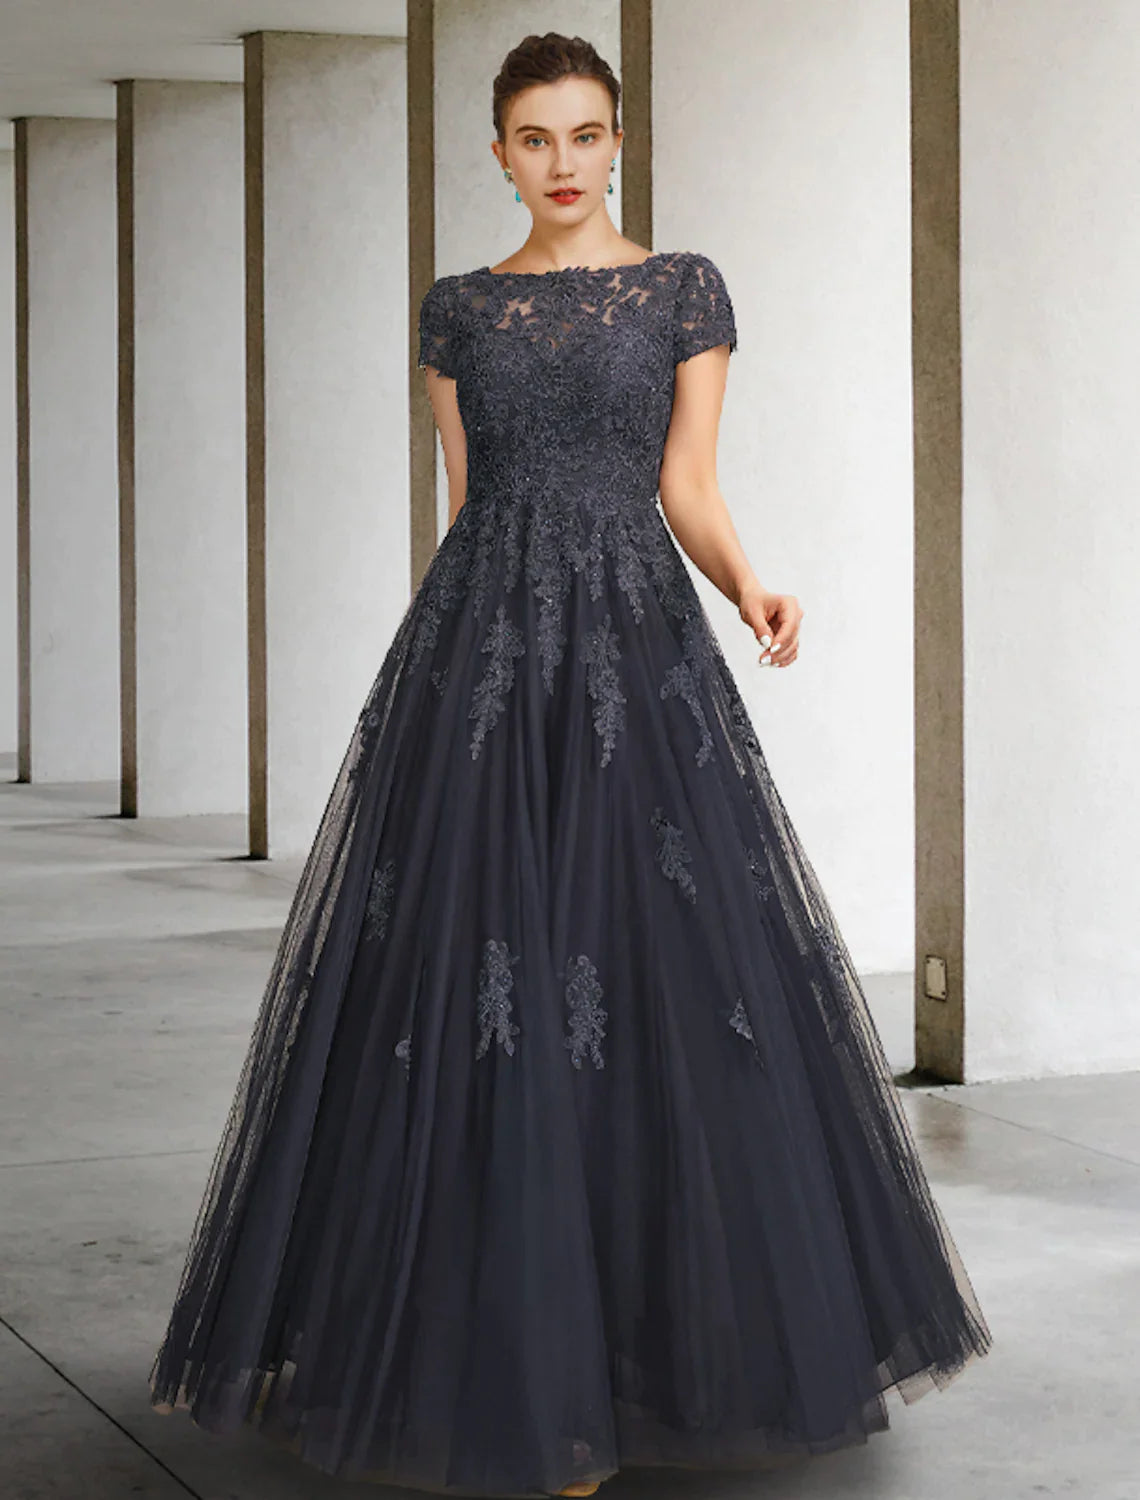 Ball Gown Mother of the Bride Dress Elegant Floor Length Lace Tulle Short Sleeve Crystals Appliques